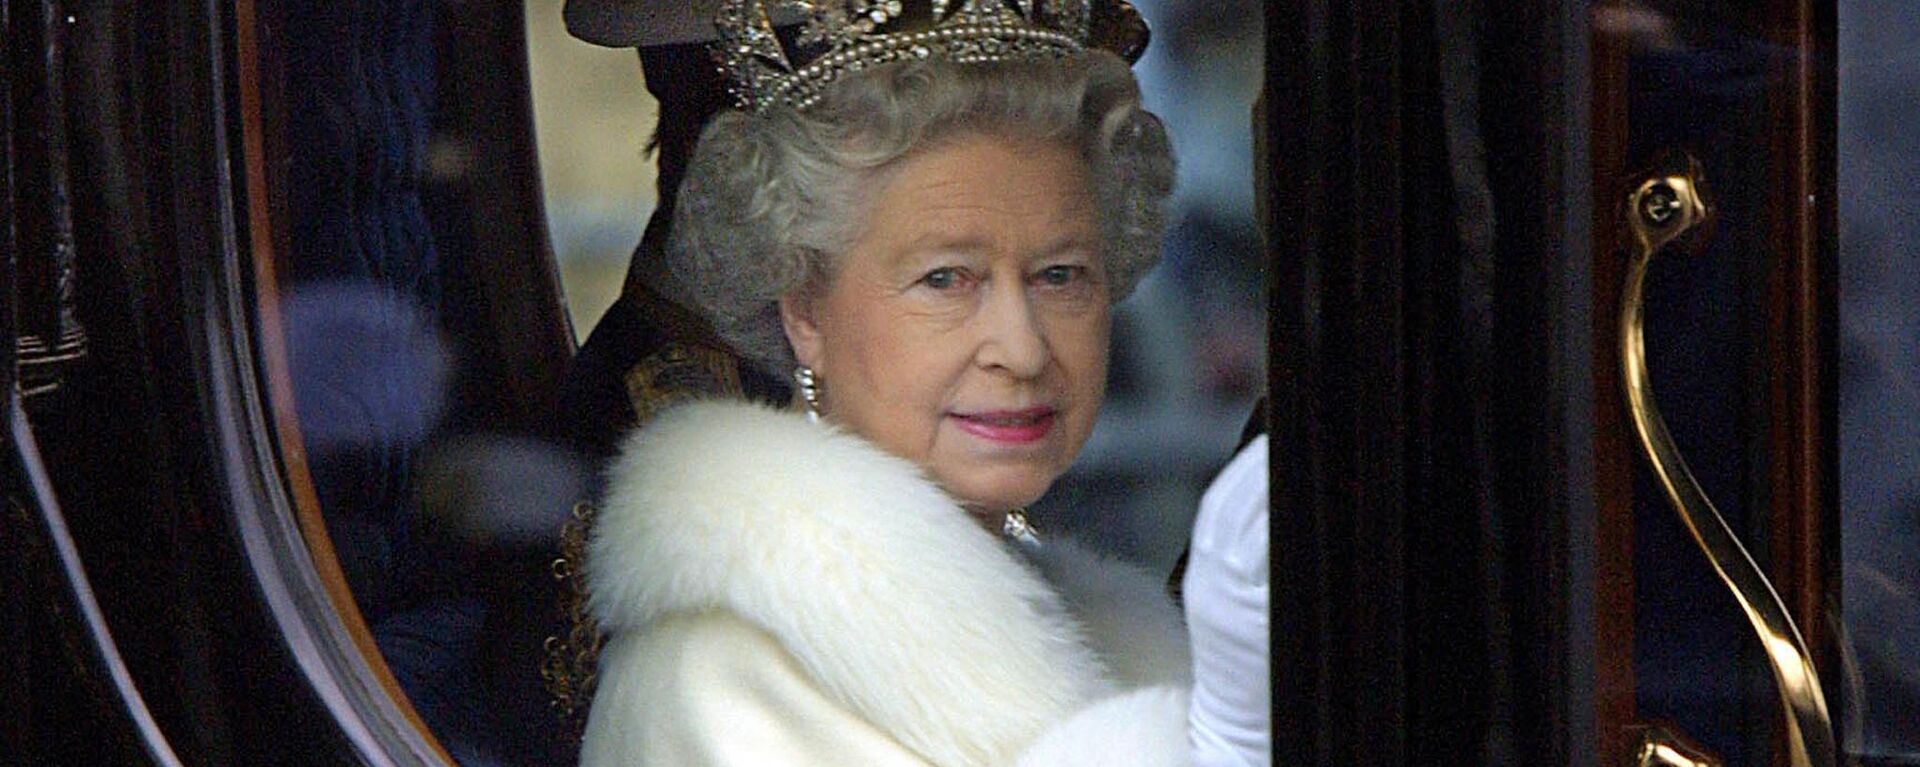 Queen Elizabeth II acknowledges the crowd from her horse carriage as she leaves Buckingham palace for the opening of parliament in London, 06 December 2000 - Sputnik International, 1920, 09.09.2022